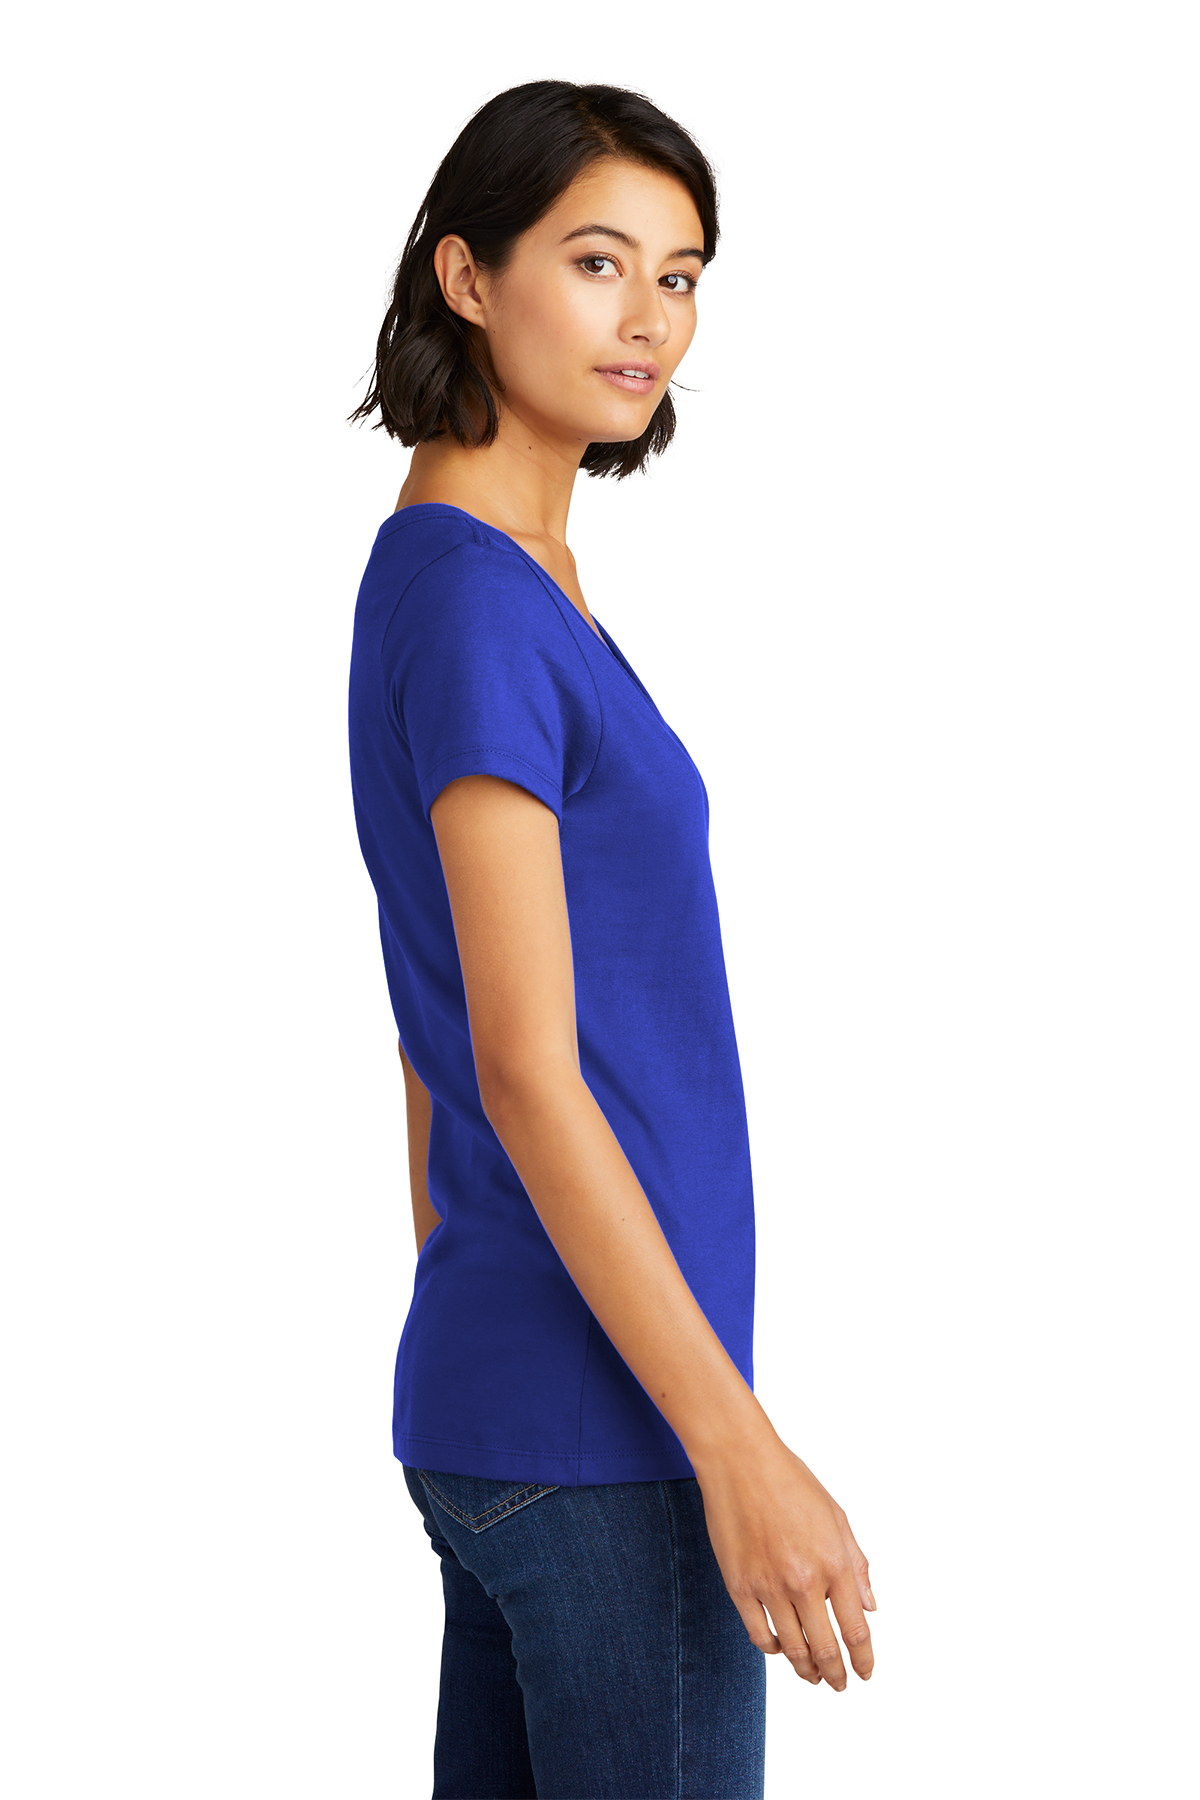 District Women’s Very Important Tee V-Neck | Product | SanMar